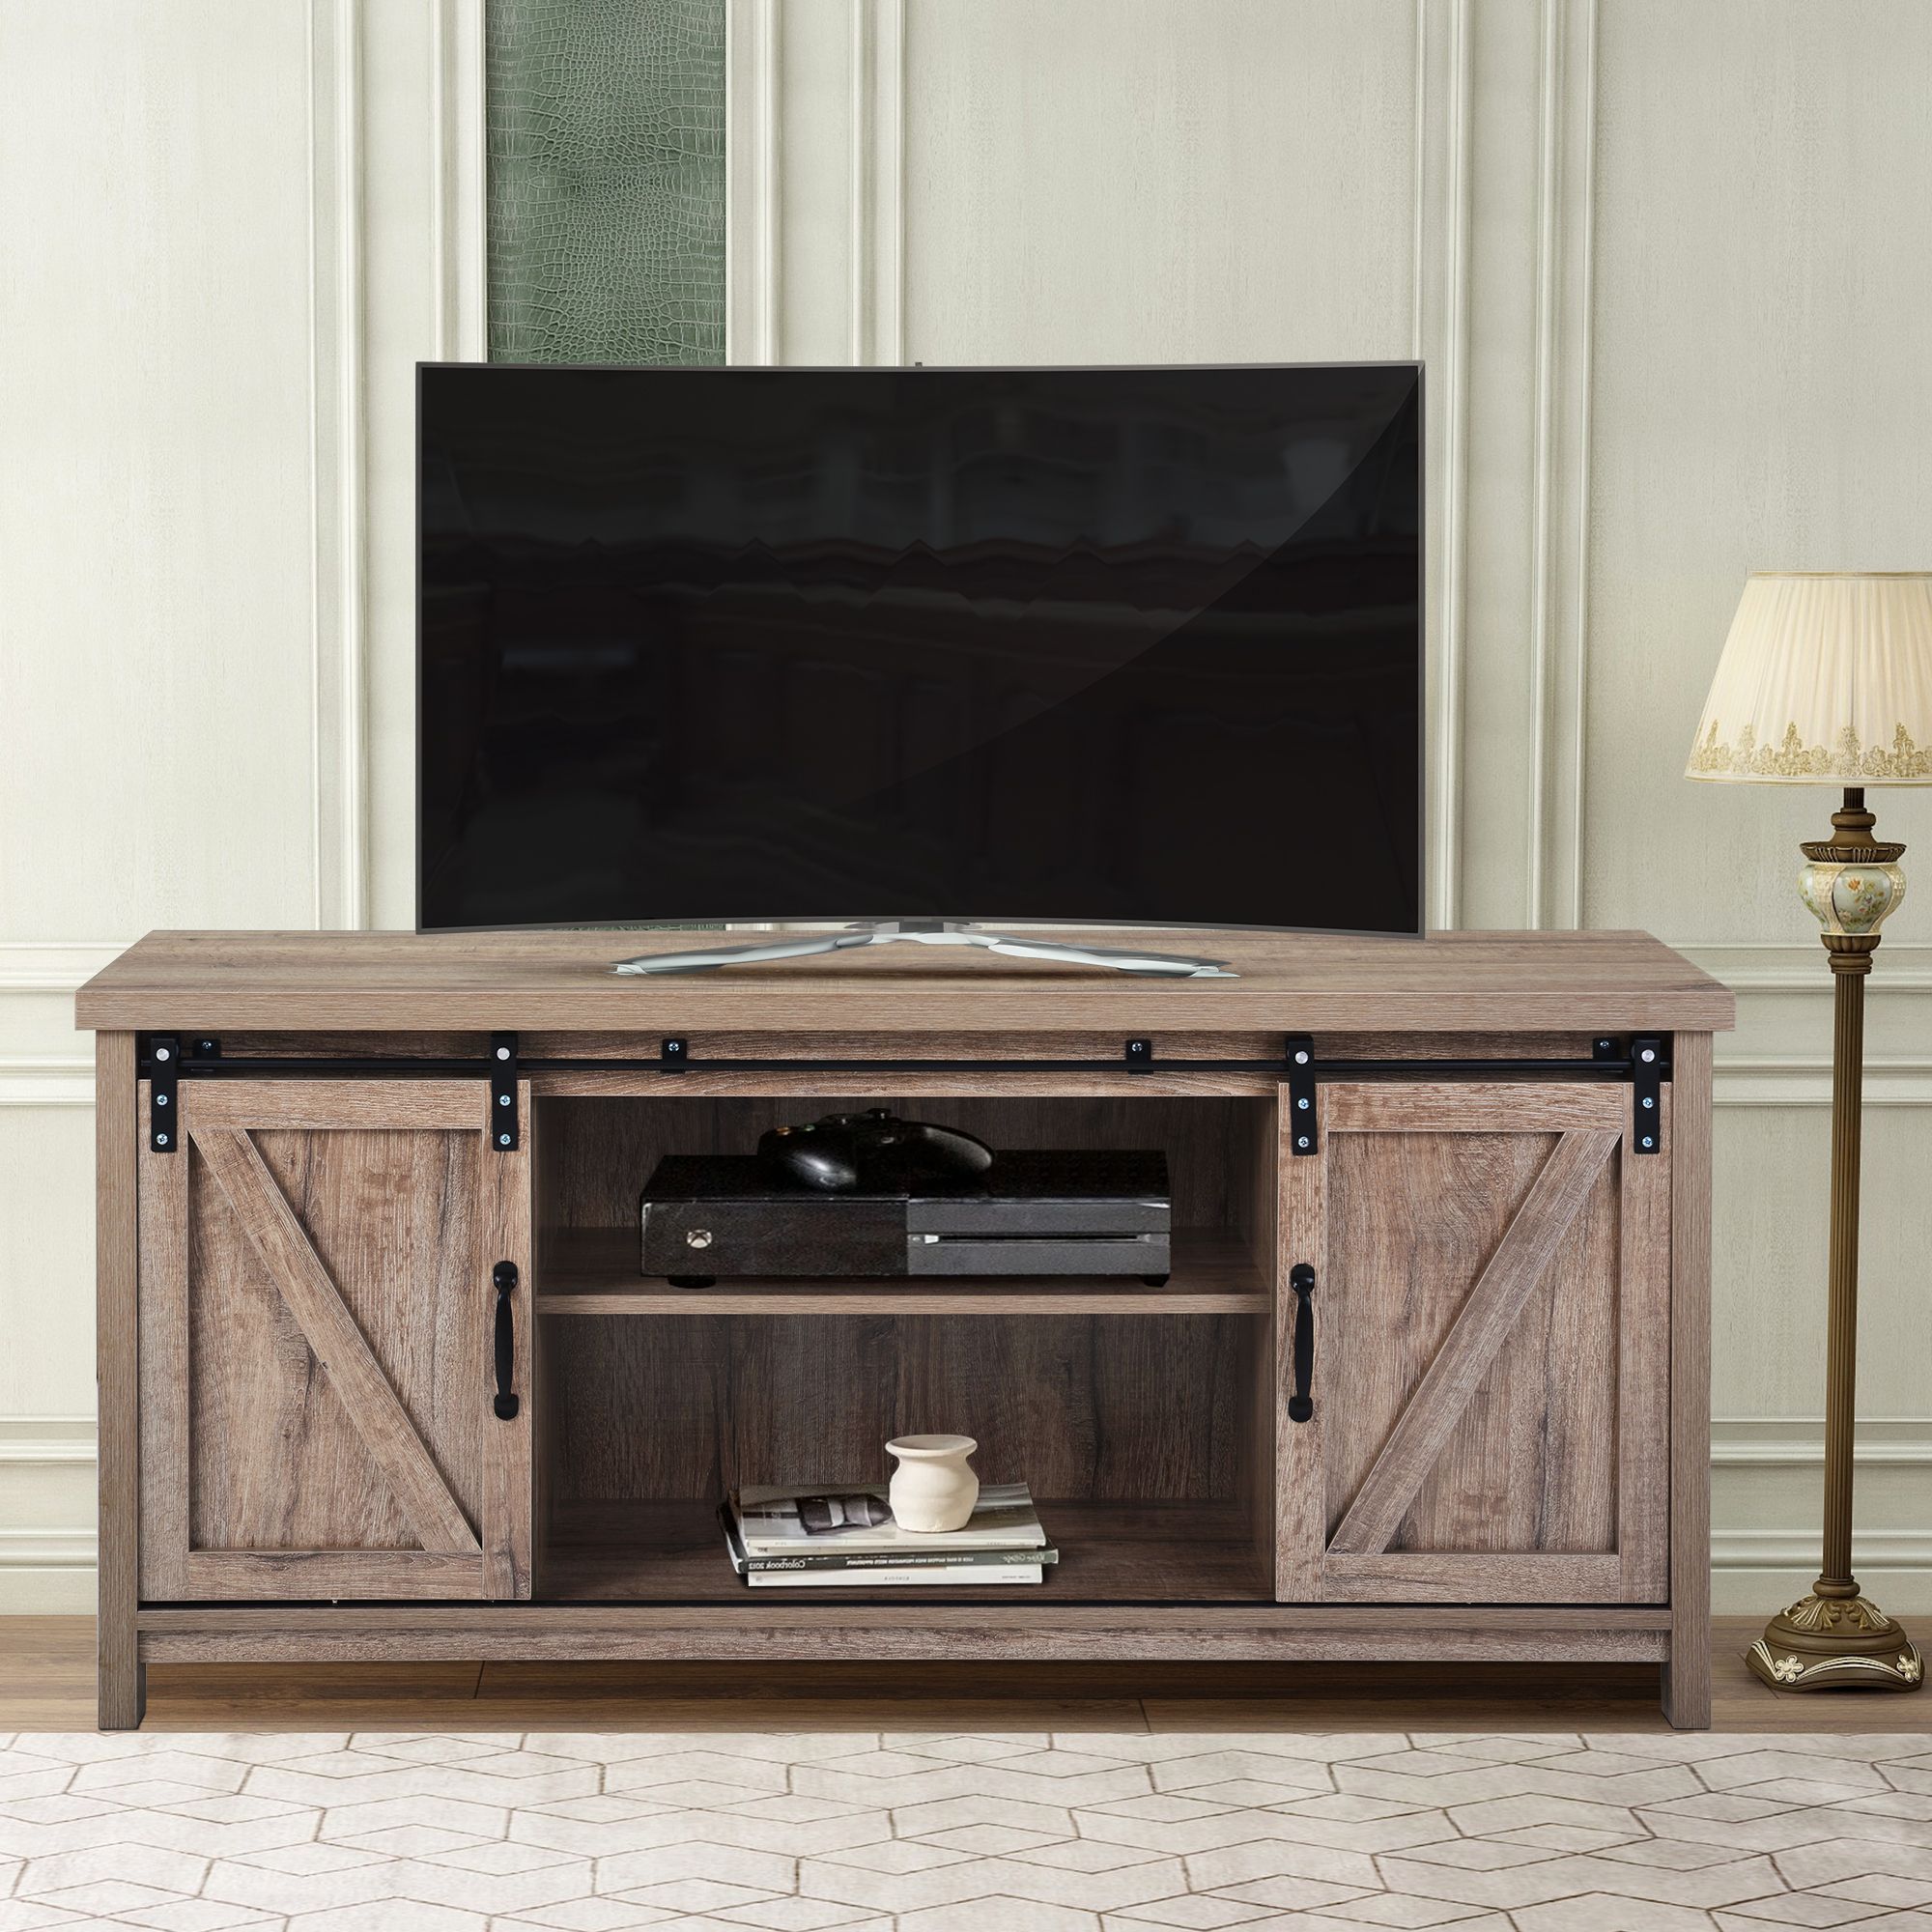 Wood Tv Stand, Modern Corner Tv Table Stands, Rustic Style Throughout Most Current Modern 2 Glass Door Corner Tv Stands (View 3 of 10)